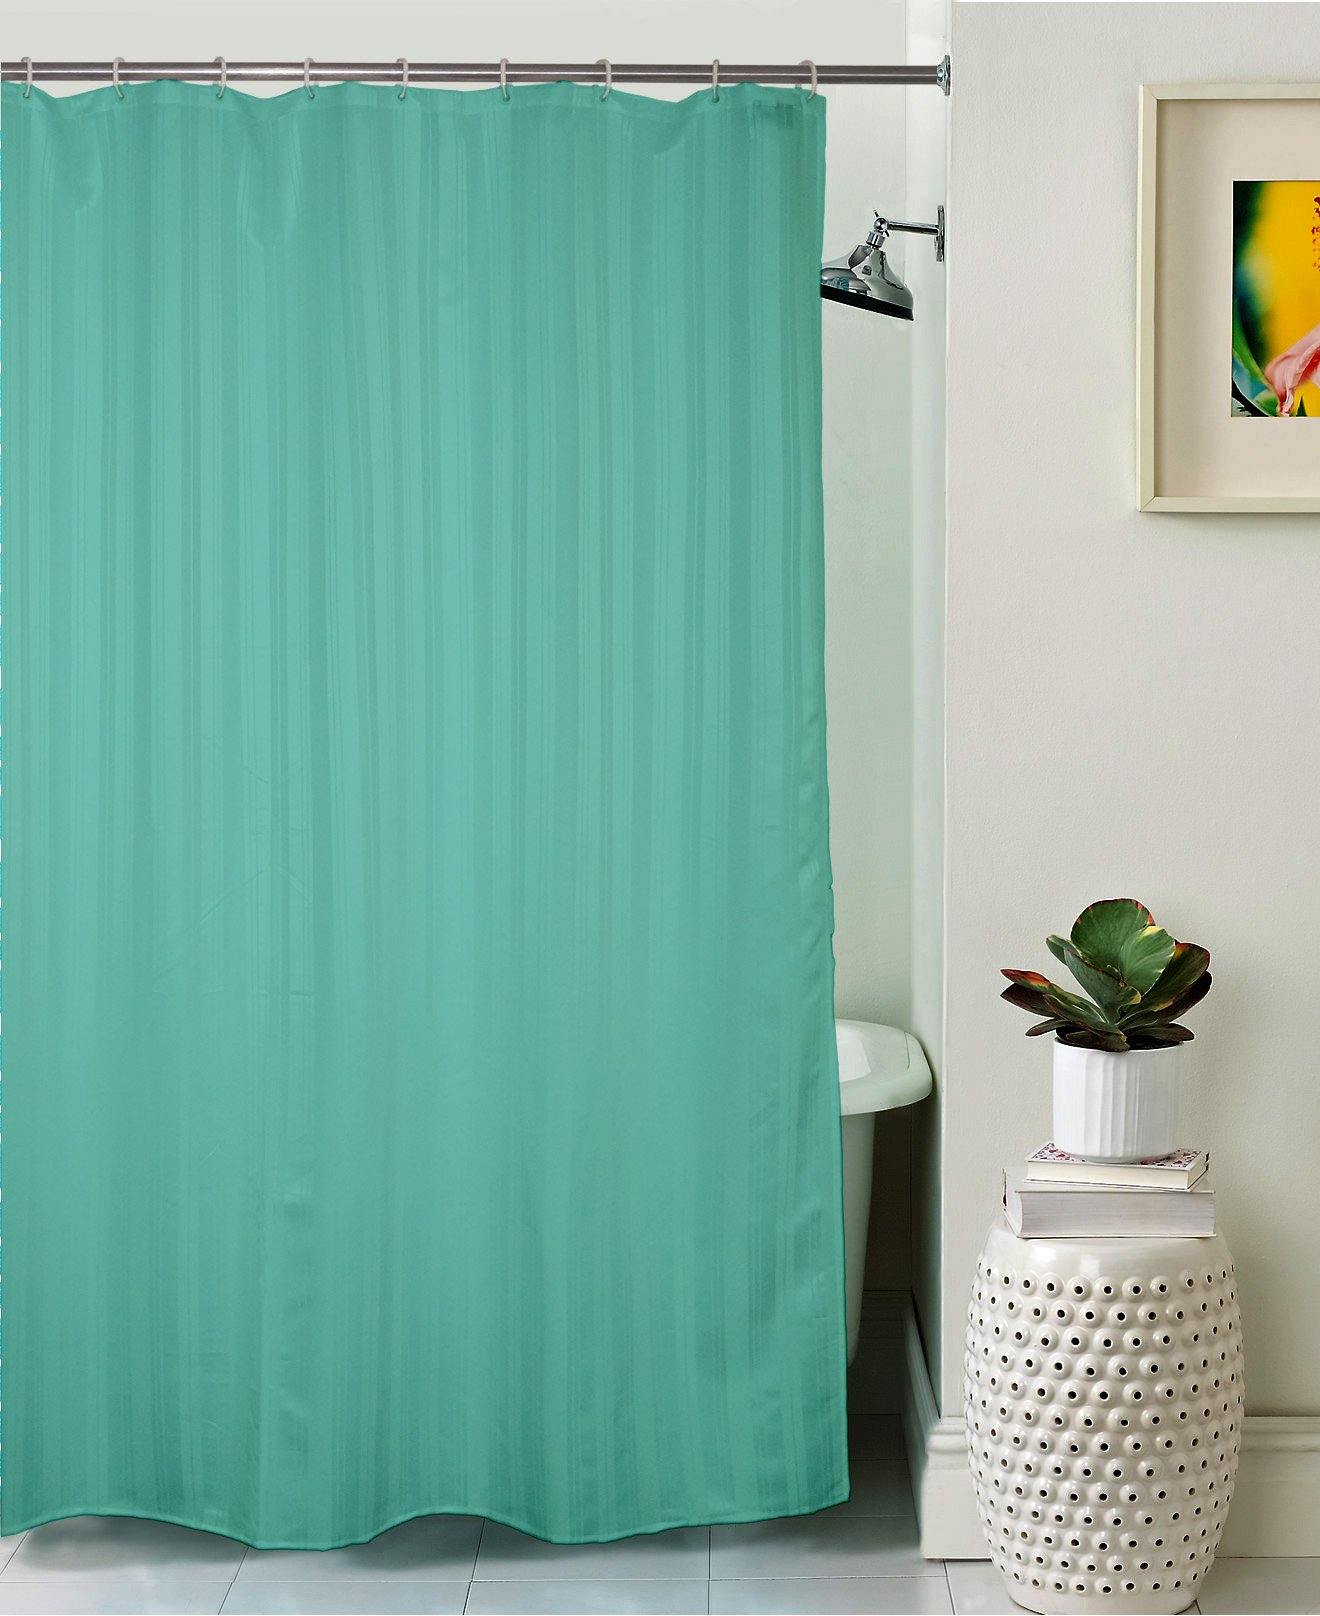 Lushomes Green Thick Stripe Waterproof Bathroom Shower Curtain with 12 Eyelets and 12 C-hooks - Lushomes